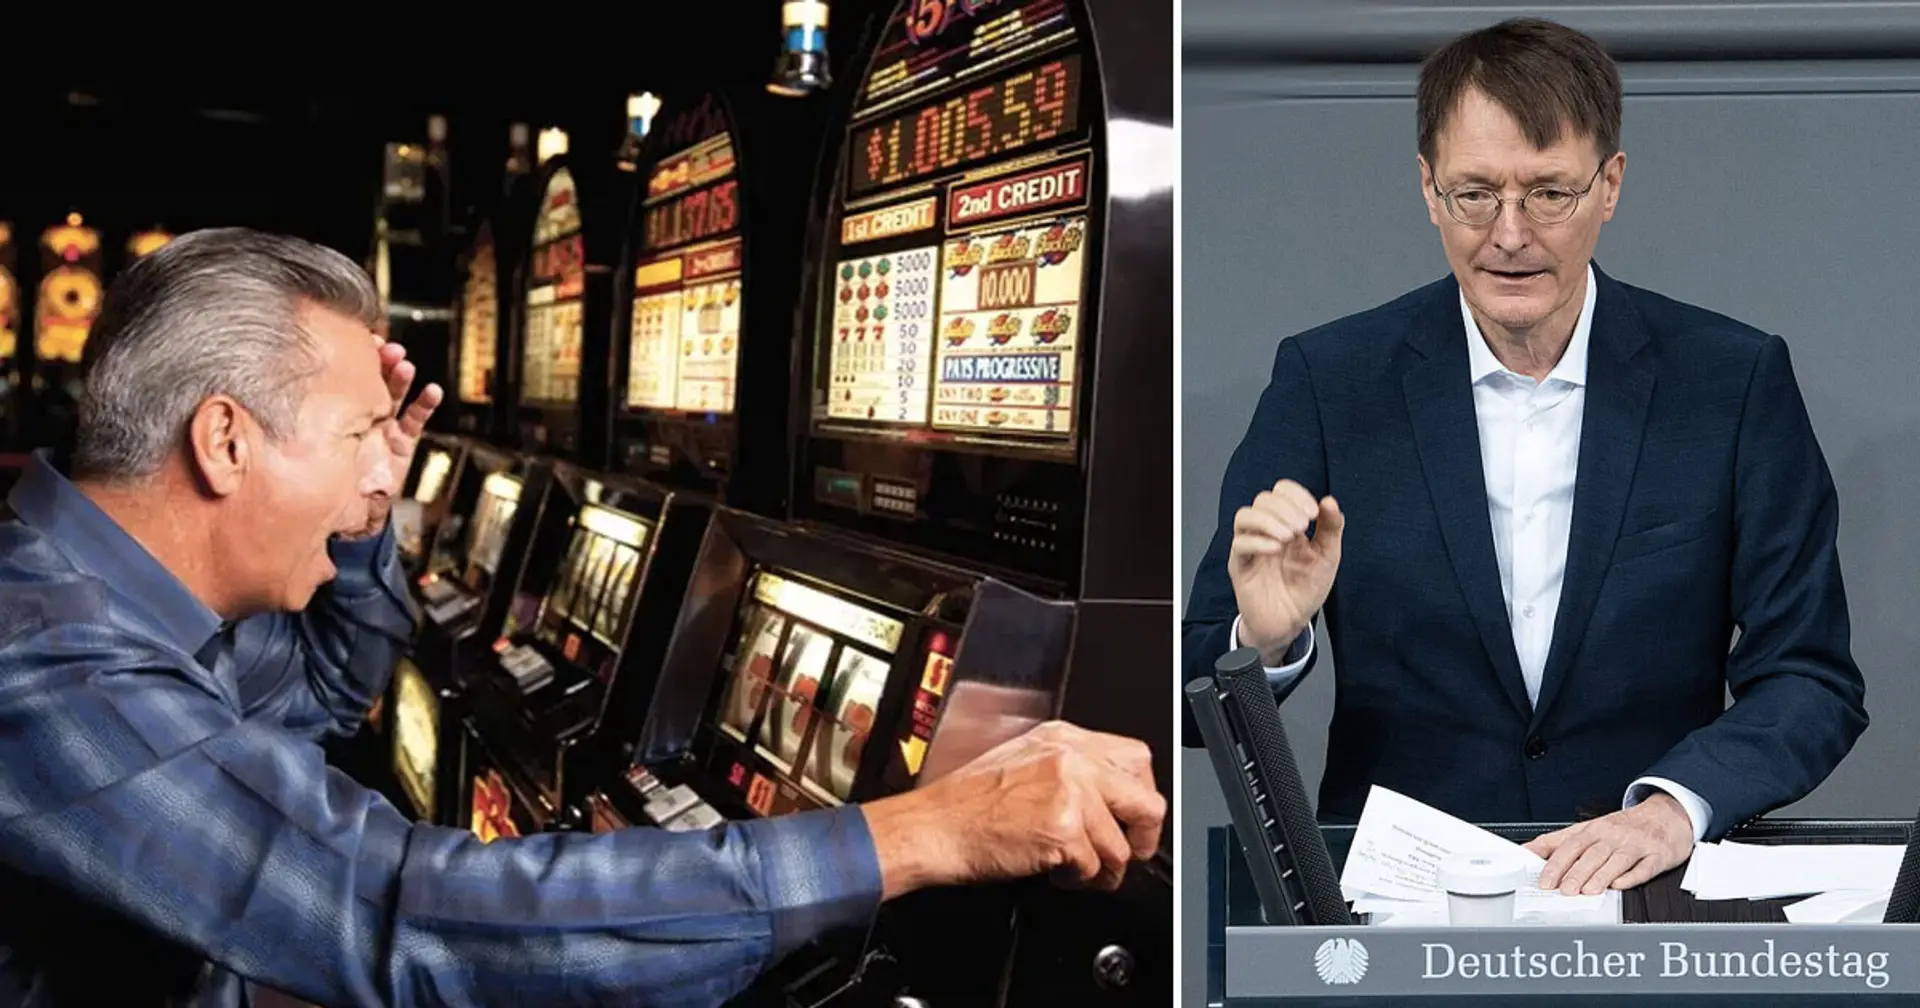 German demands instant government's reaction to 'epidemic' gambling addiction growth